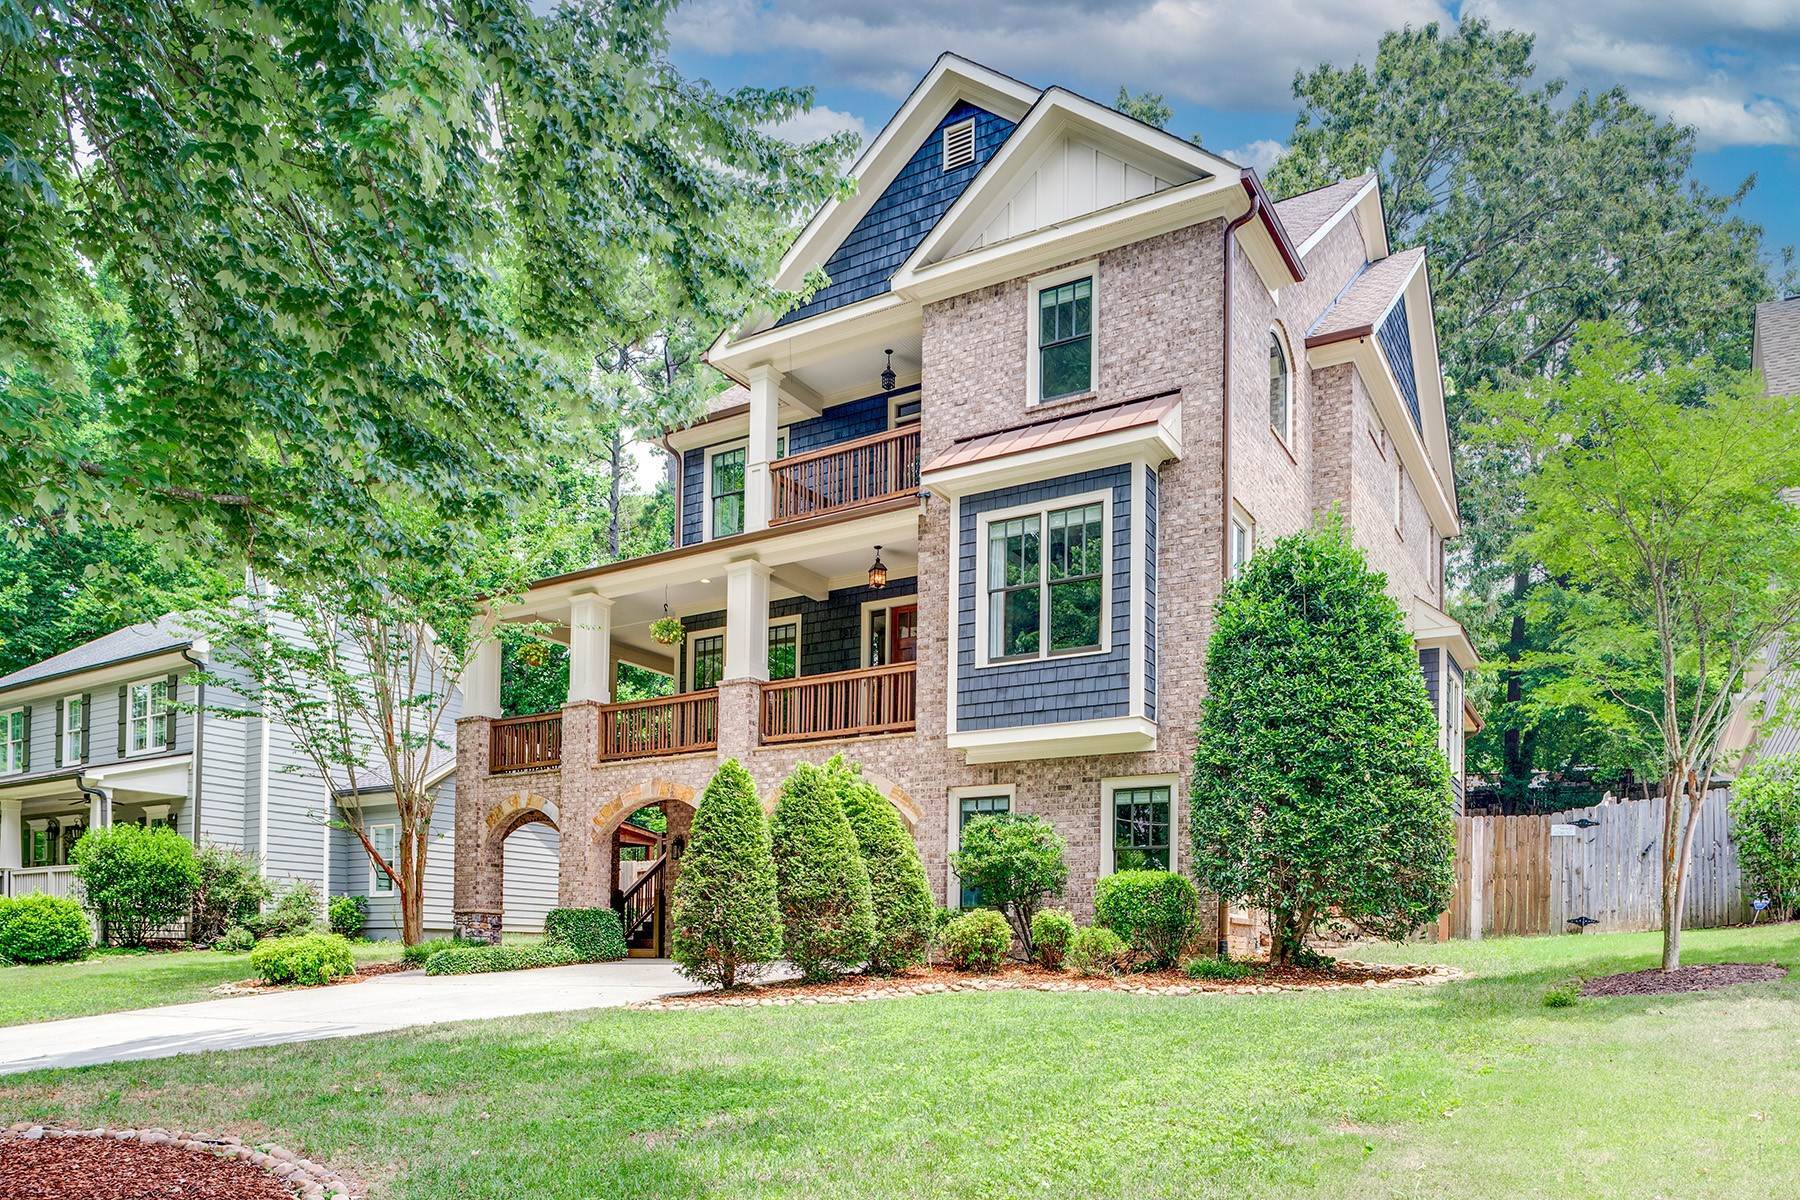 Single Family Homes for Sale at Immaculate Three-Story Craftsman in Ashford Park 2795 Georgian Drive E Brookhaven, Georgia 30341 United States